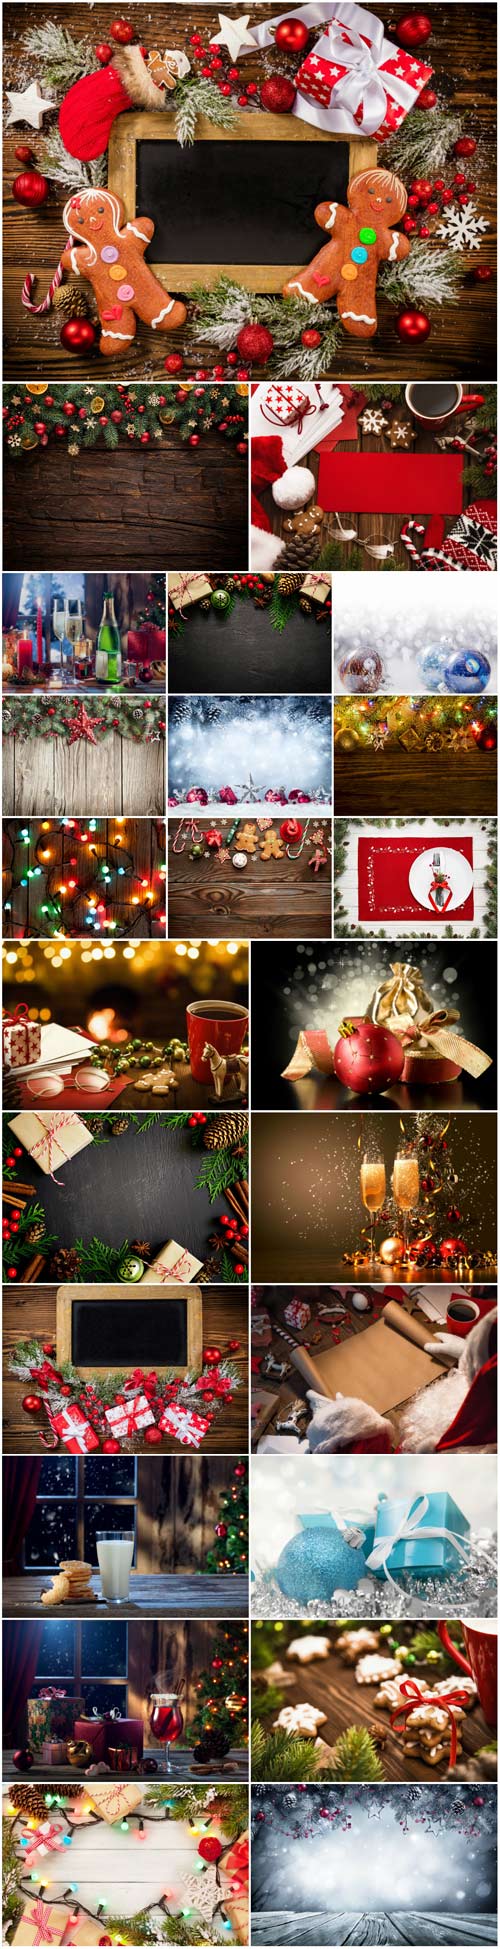 New Year and Christmas stock photos №55